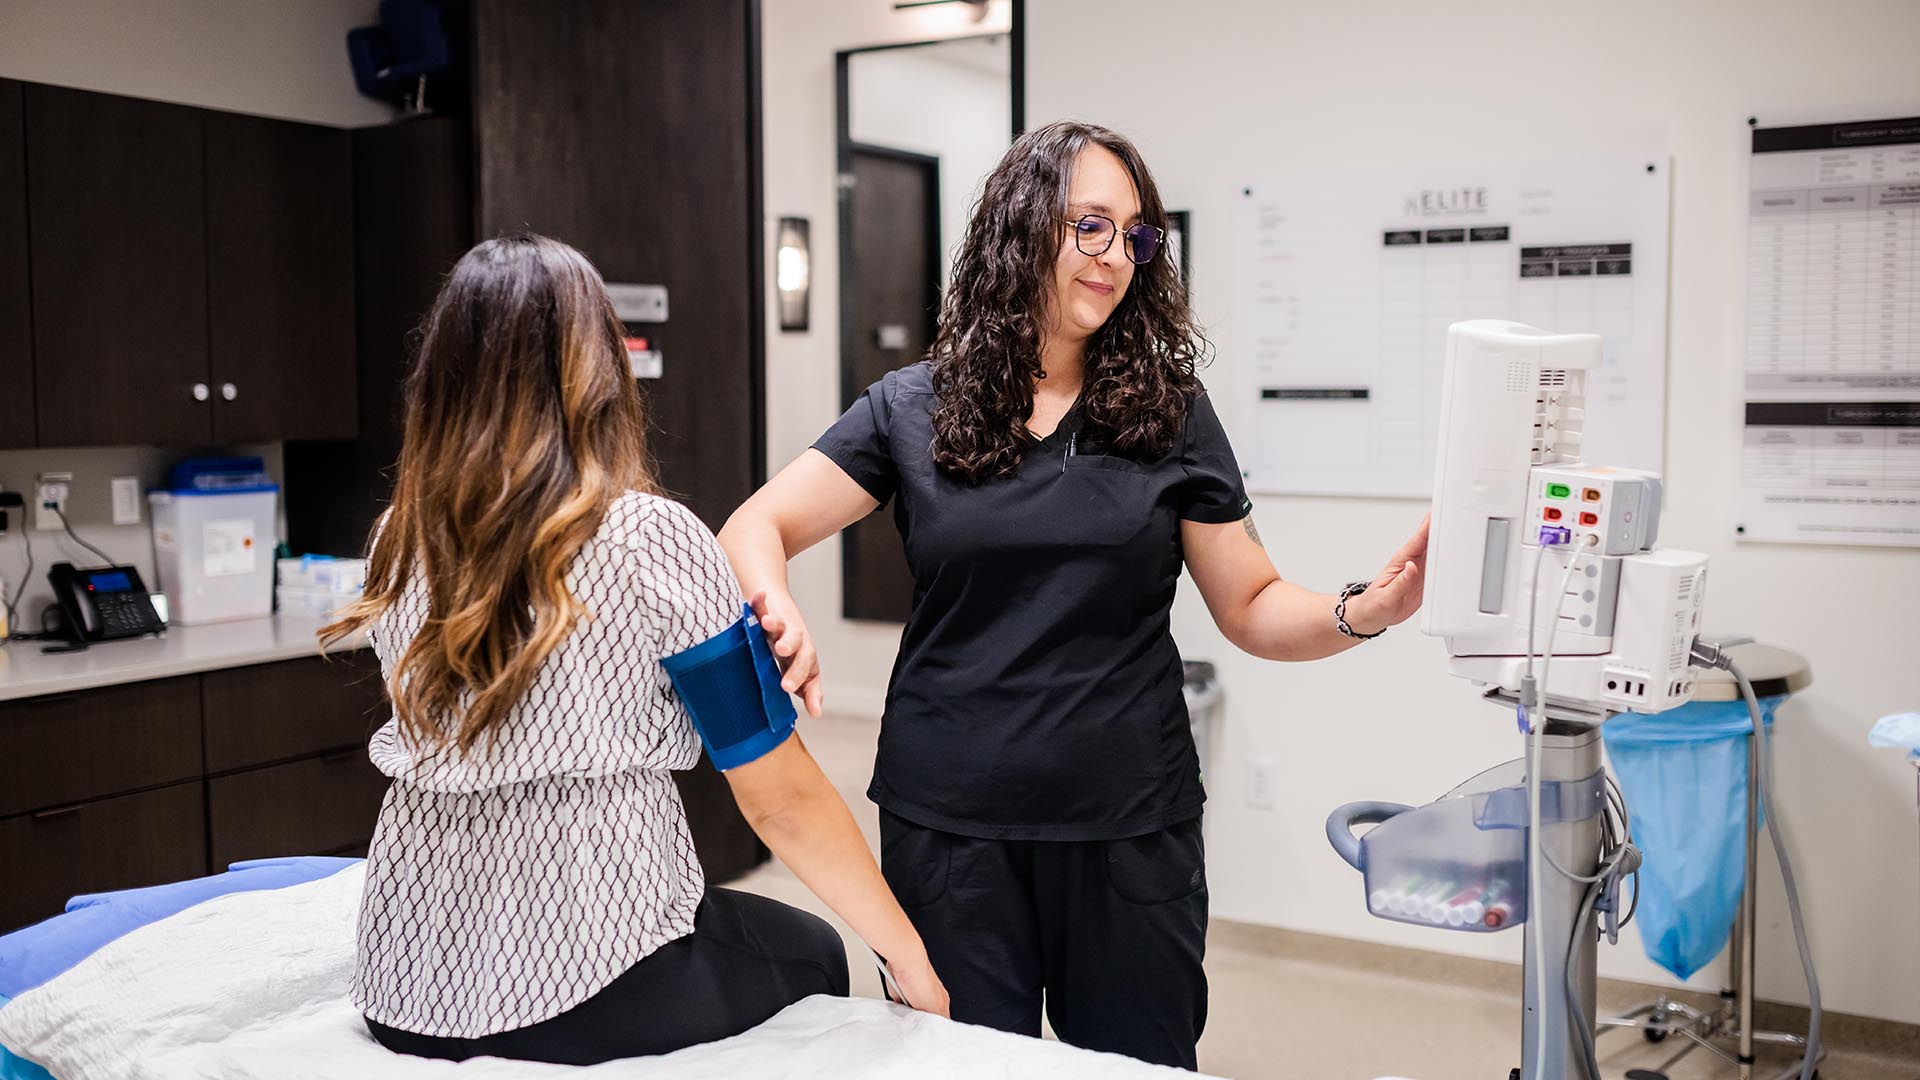 MSU Denver alumna Alejandra Webster, a recipient of the Deferred Action for Childhood Arrivals program, became a registered nurse in 2021 and just started a new job at a private clinic. Photo by Alyson McClaran